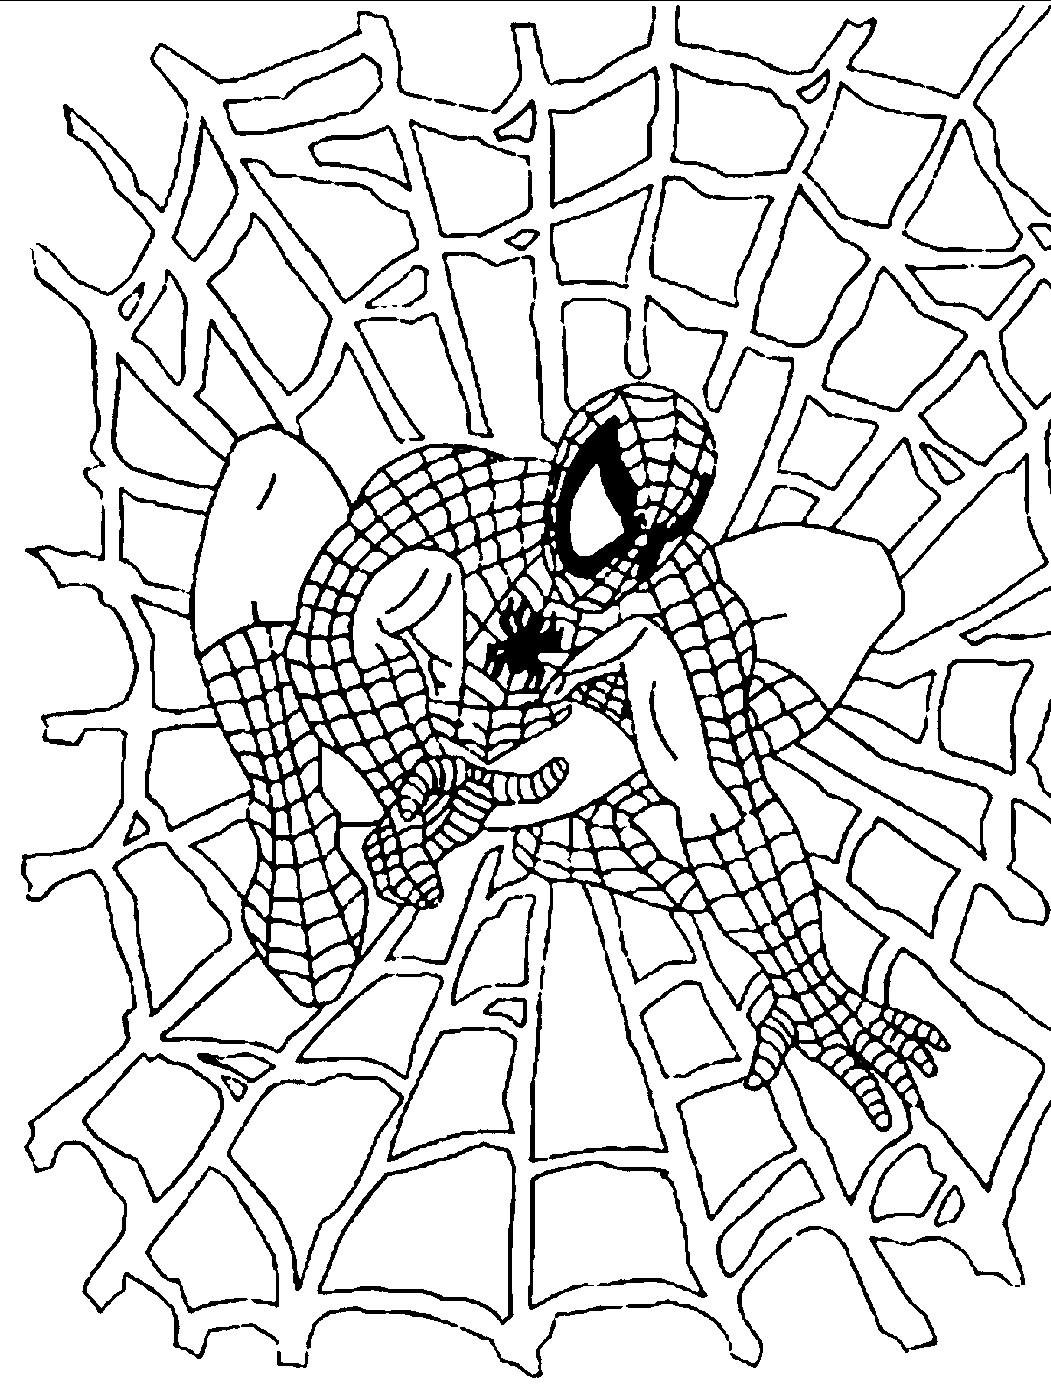 Spiderman standing on spider web Coloring Page